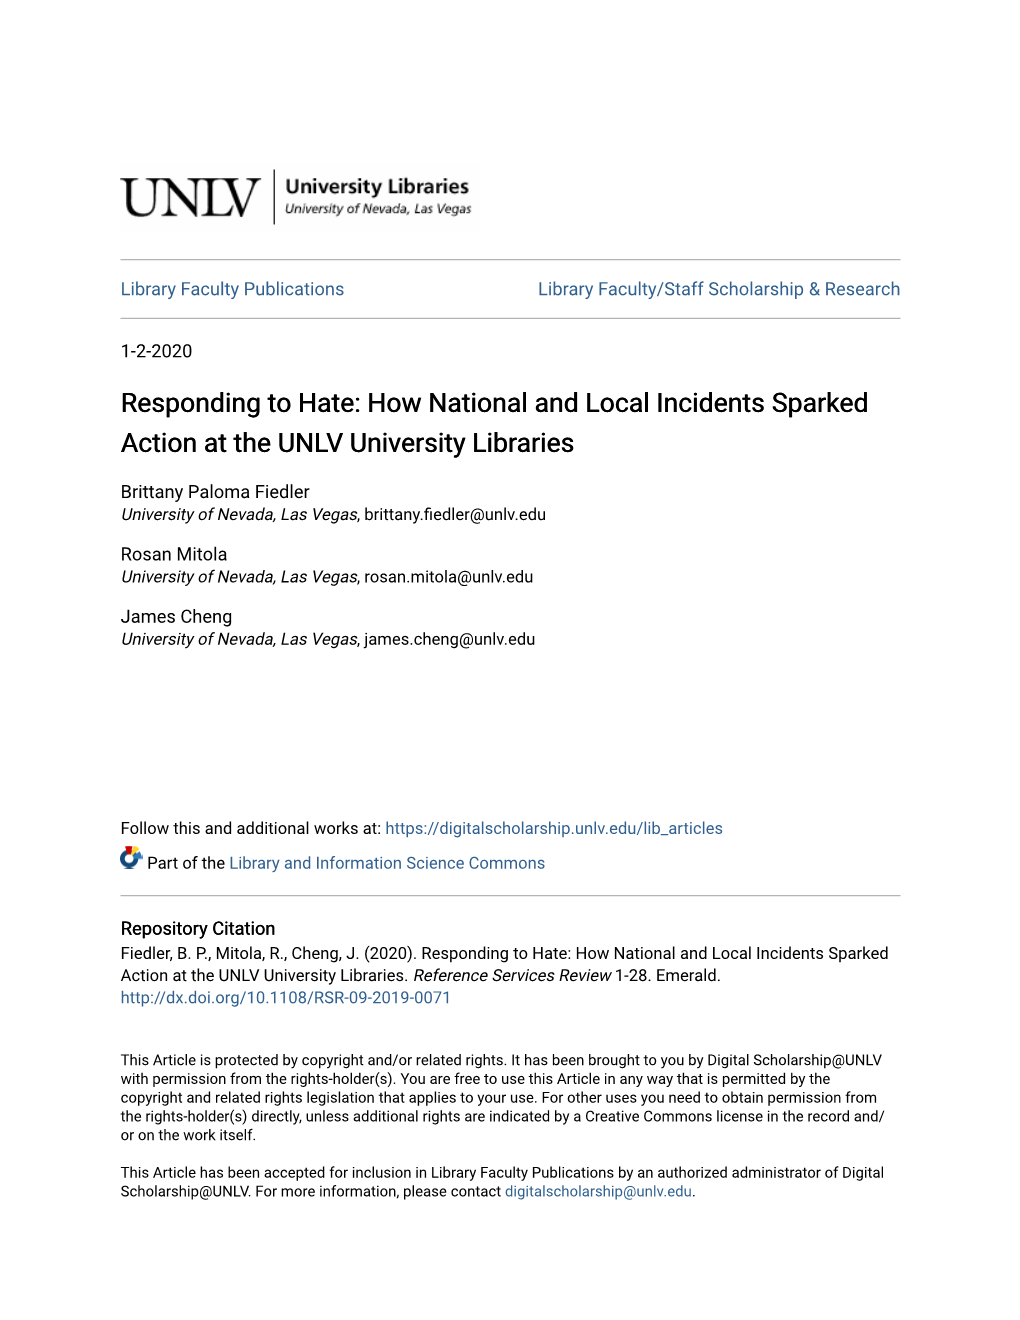 How National and Local Incidents Sparked Action at the UNLV University Libraries